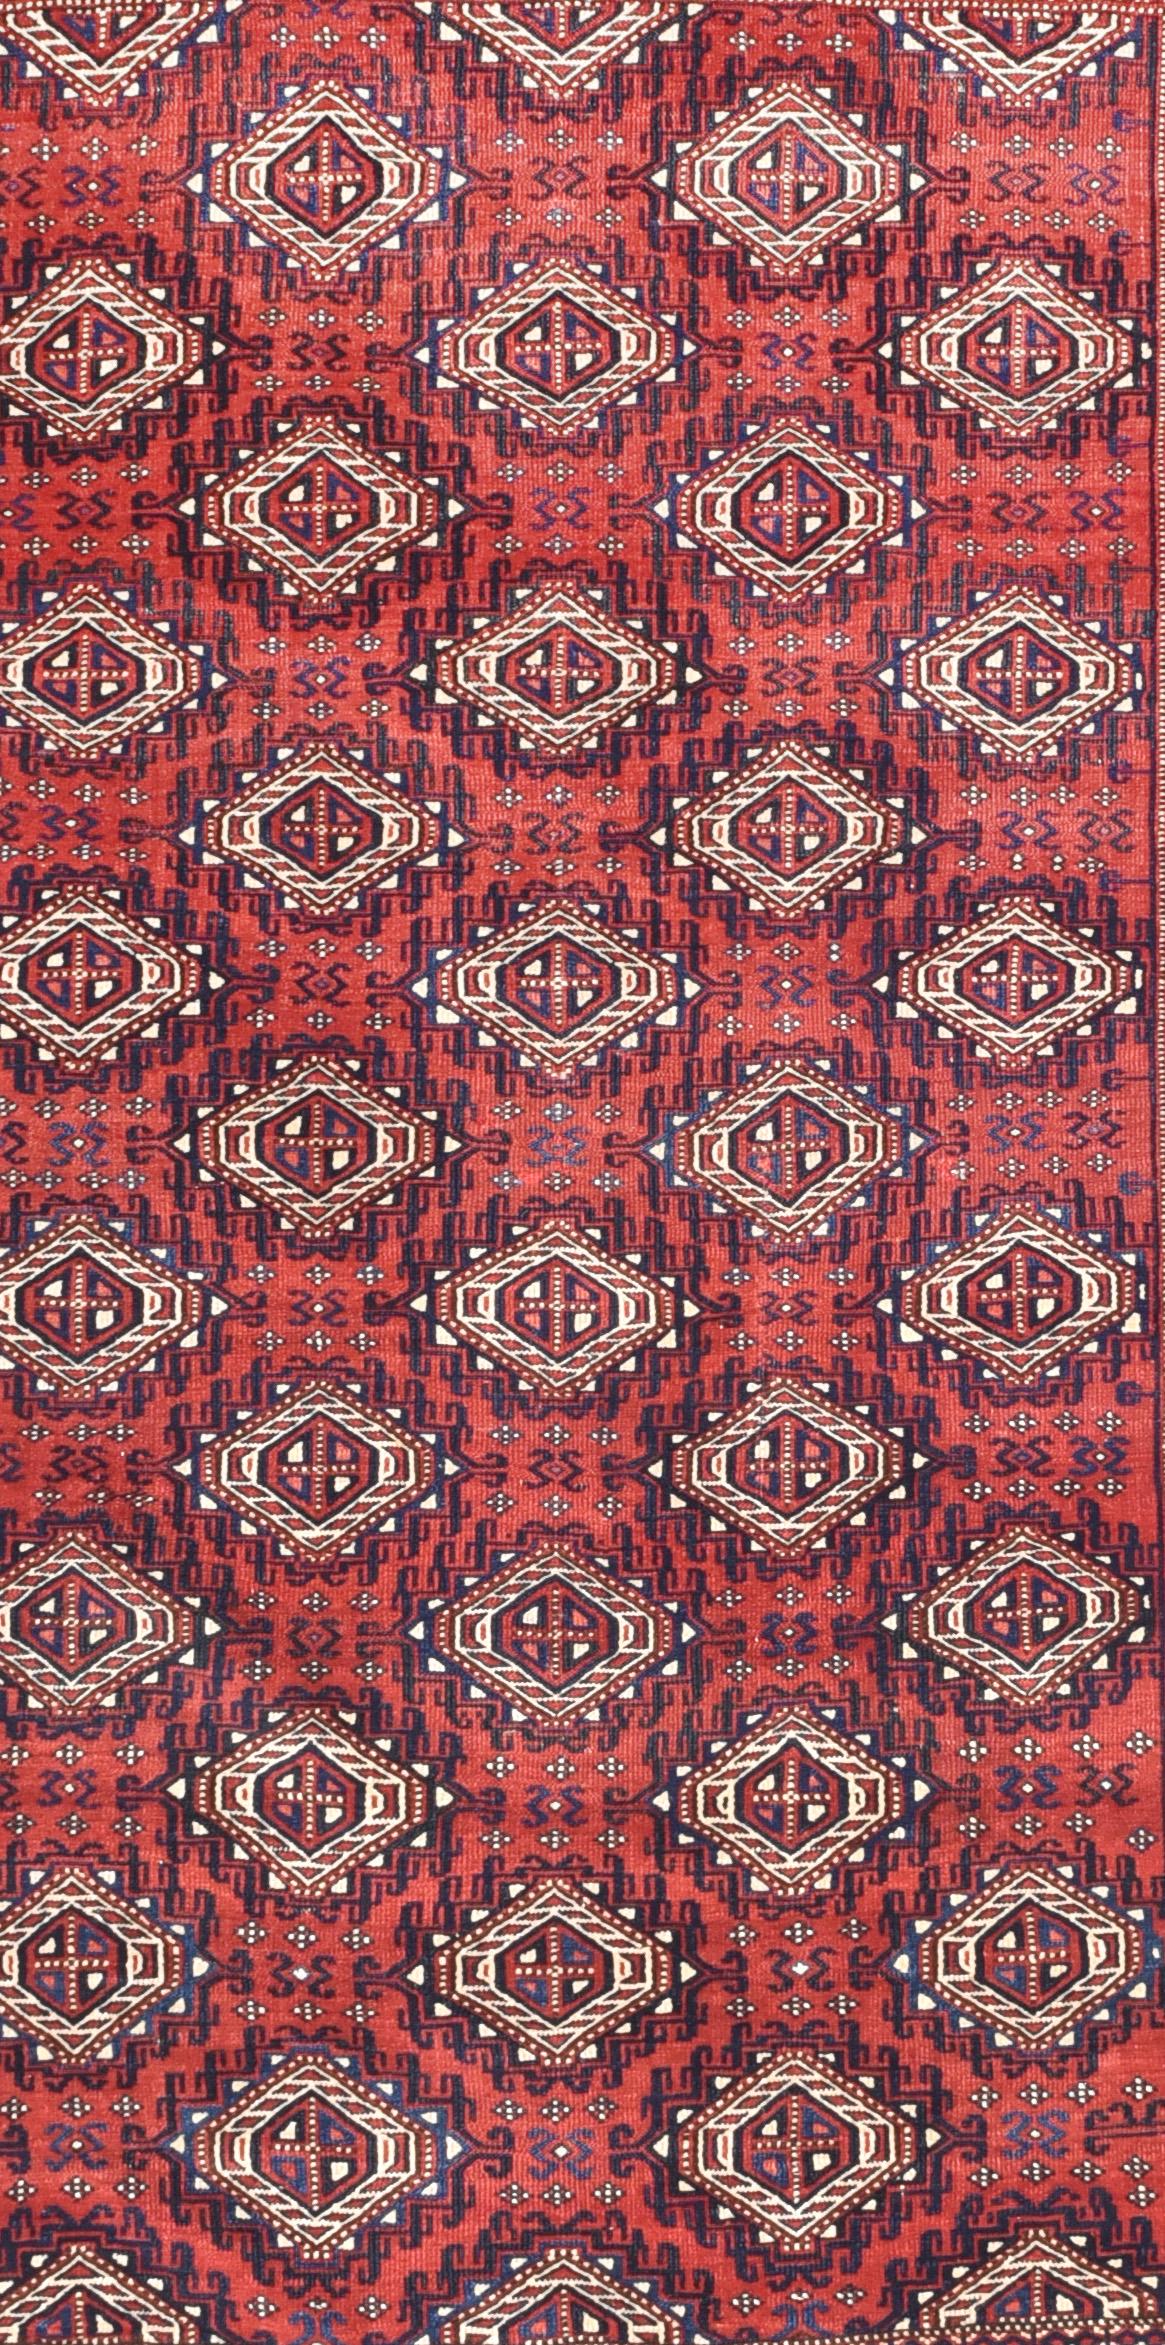 Fine Antique Yomut (Yomud) Russain Turkemanstan rug, Bukhara design, hand knotted, circa 1890

Design: Bukhara Design

The Yomut carpet is a type of Turkmen rug traditionally handwoven by the Yomut or Yomud, one of the major tribes of